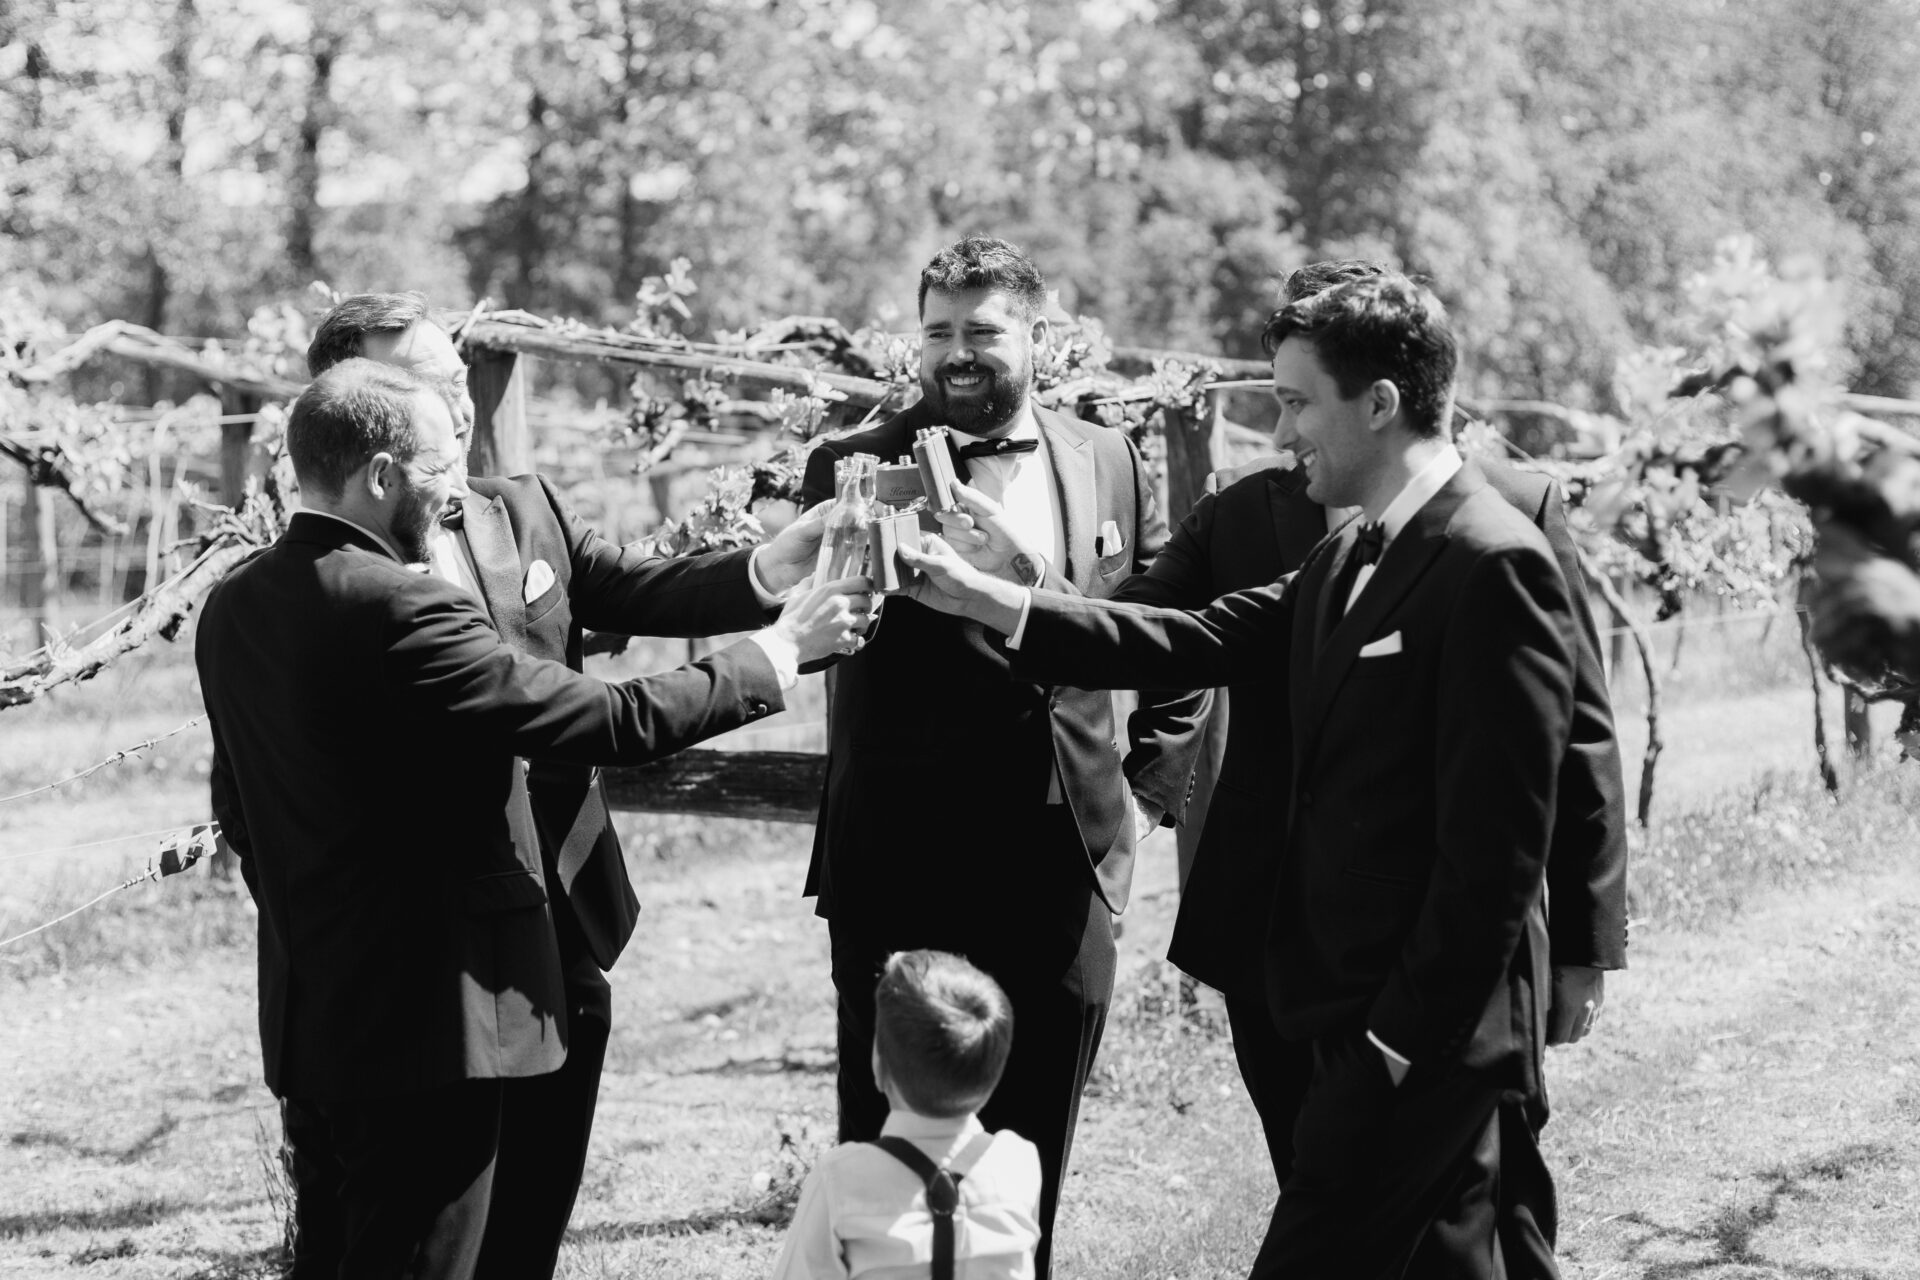 The groomsmen share a drink before the wedding ceremony